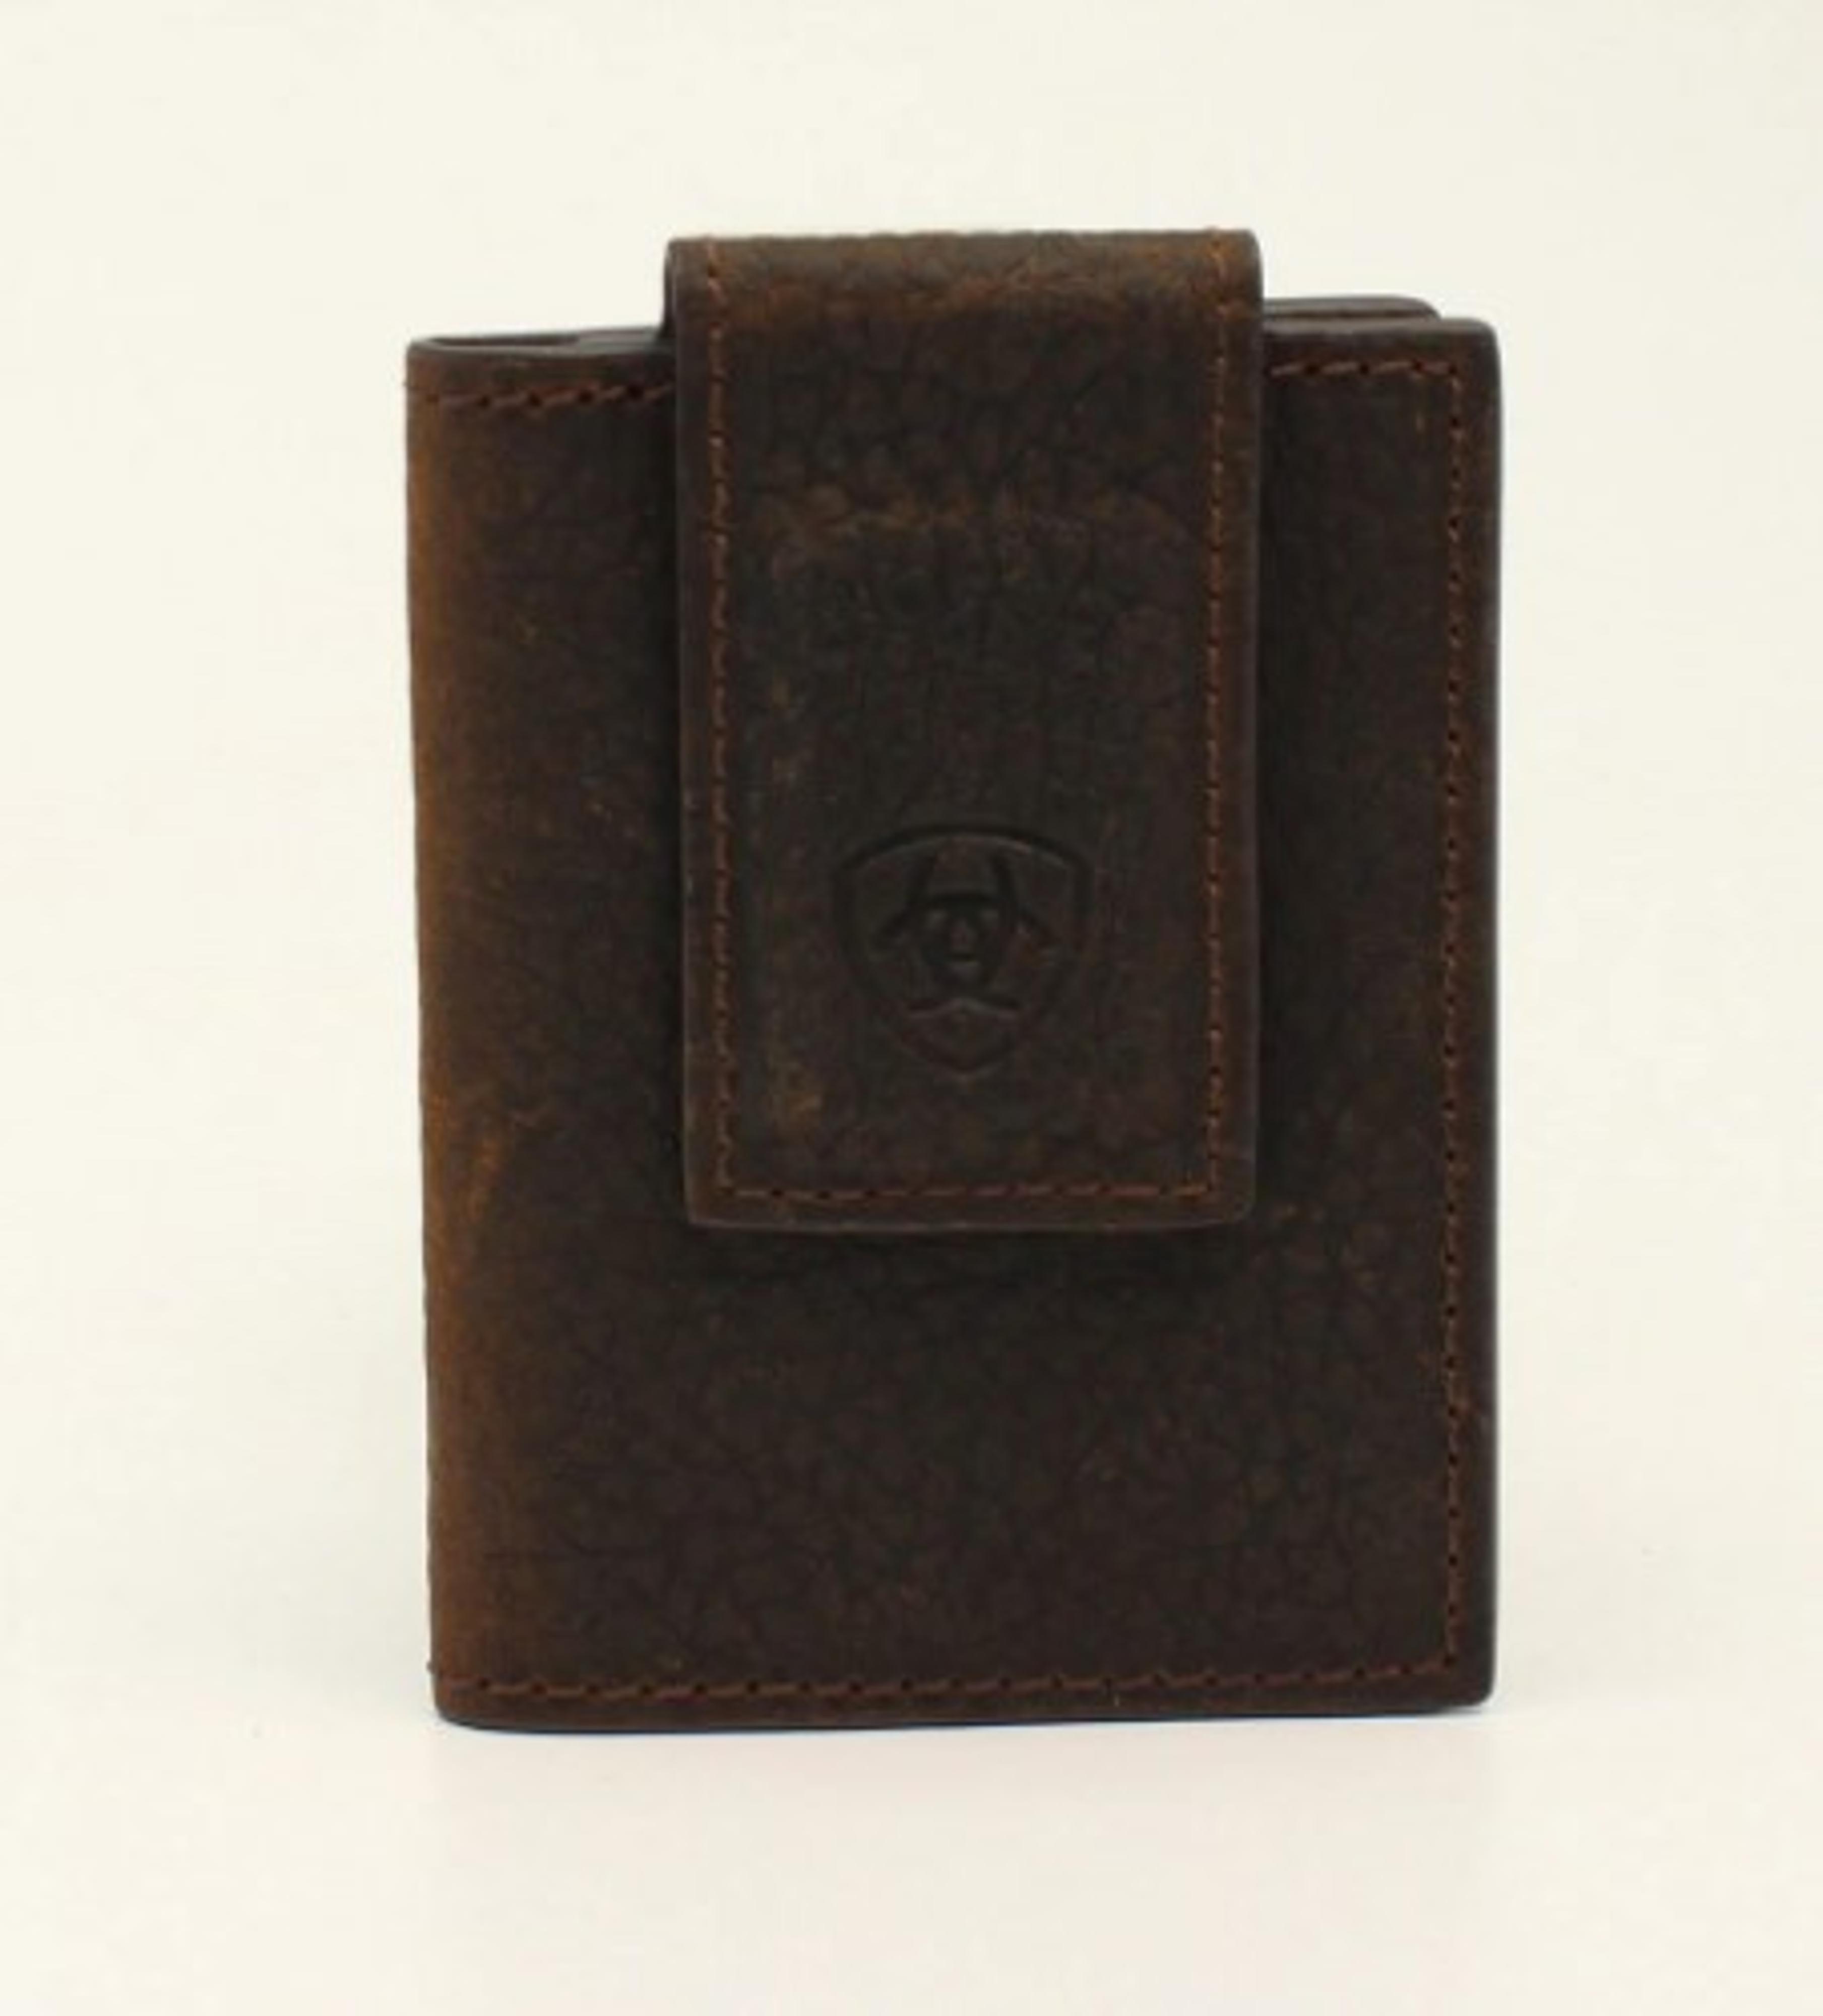  Ariat Bifold Wallet With Leather Money Clip